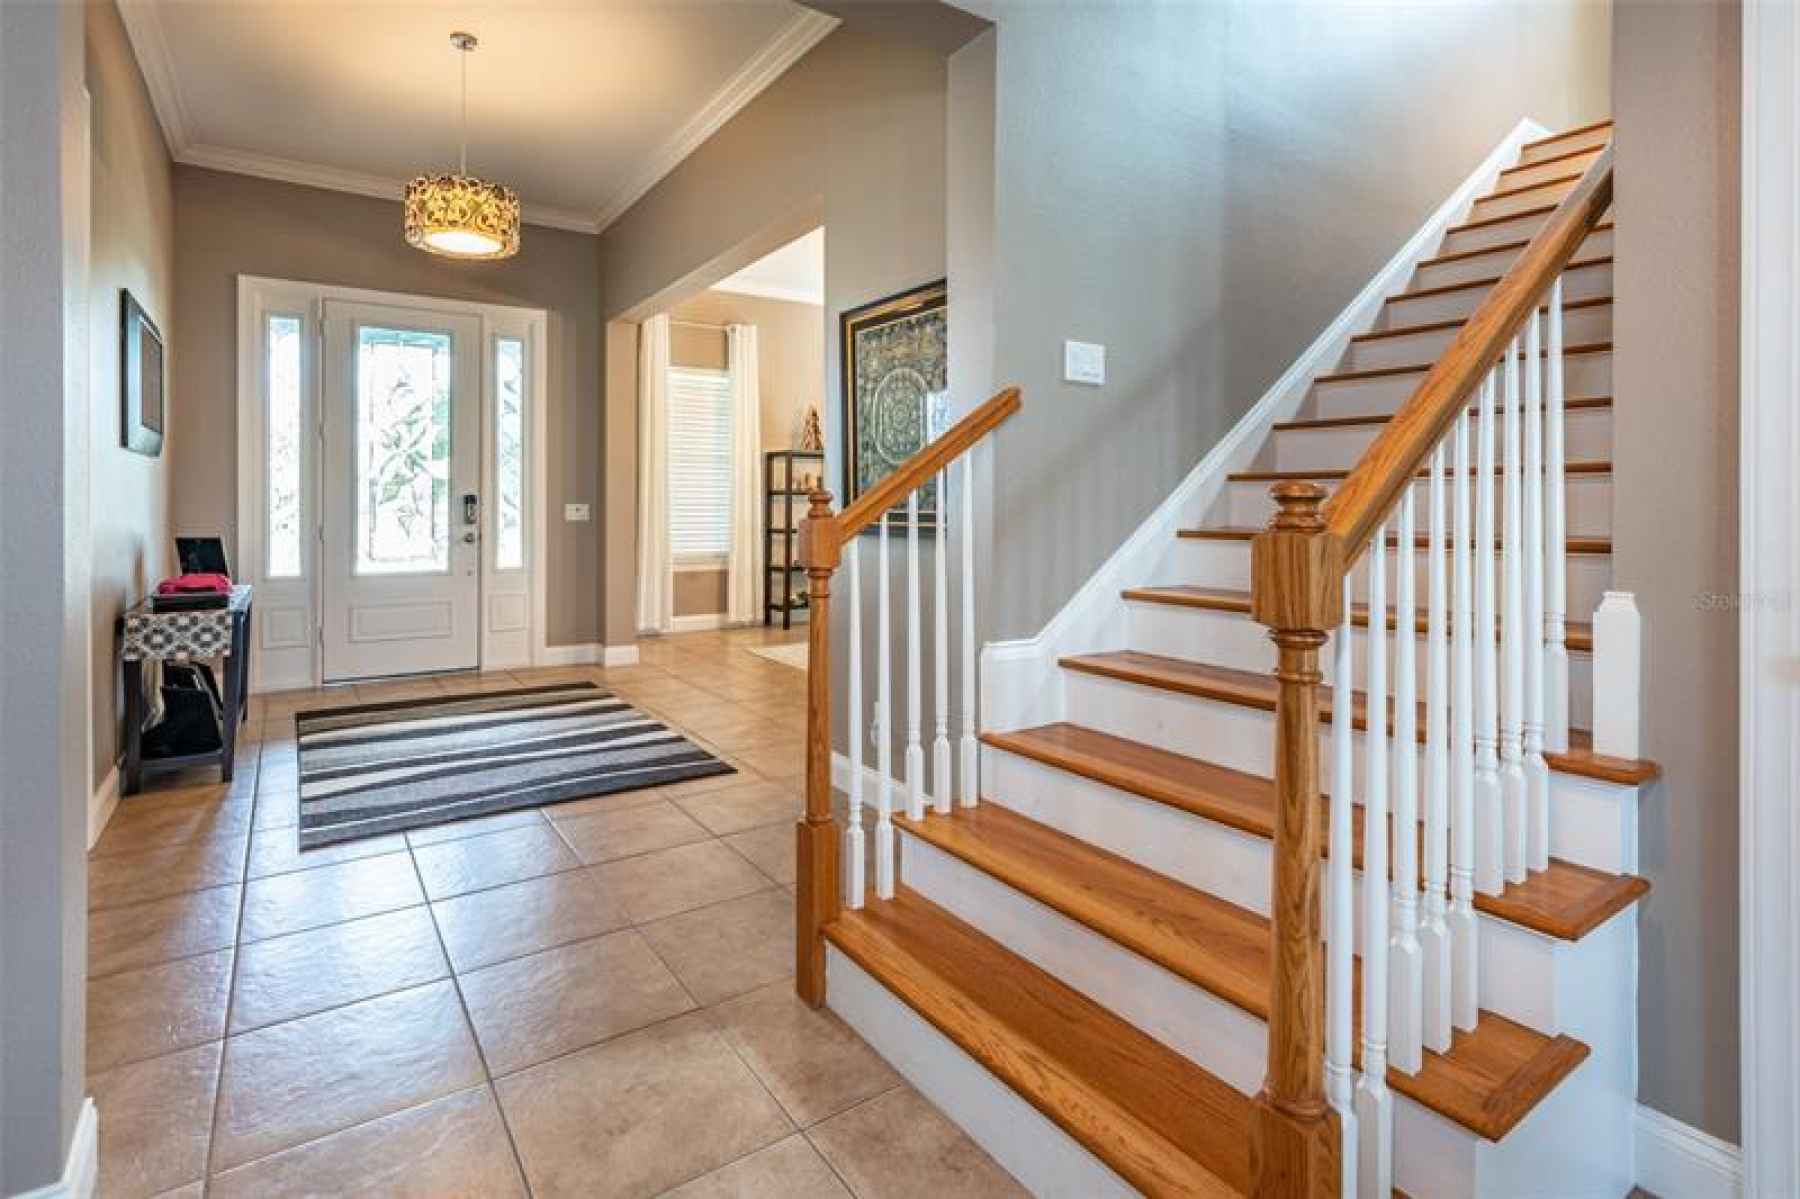 Reminiscent to the center hall colonial this foyer is spacious and grand.  The home office is locate